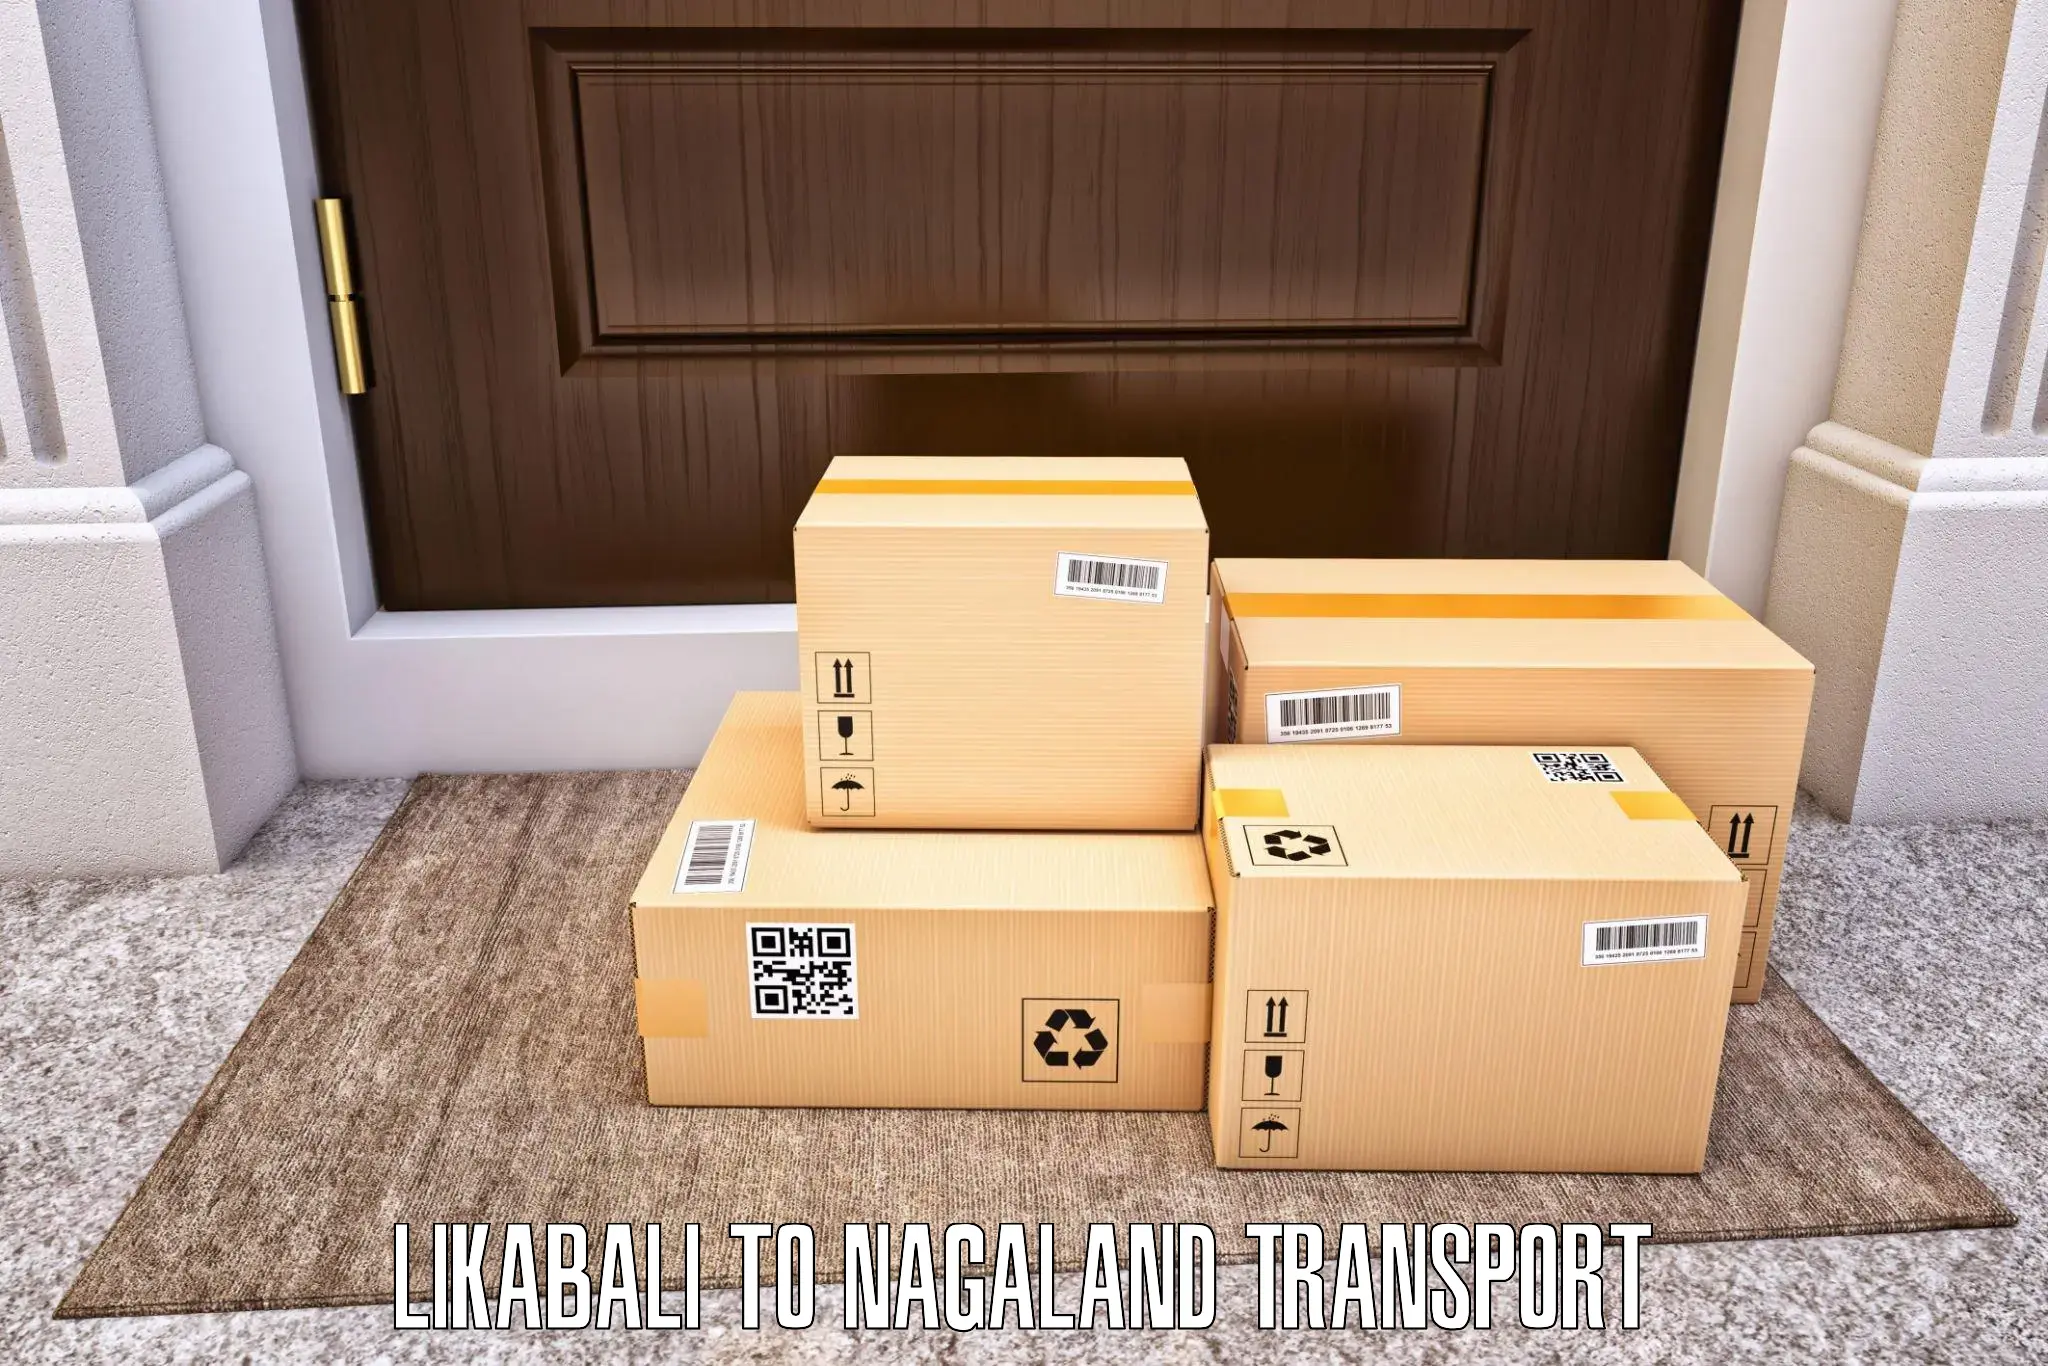 Daily transport service Likabali to Mon